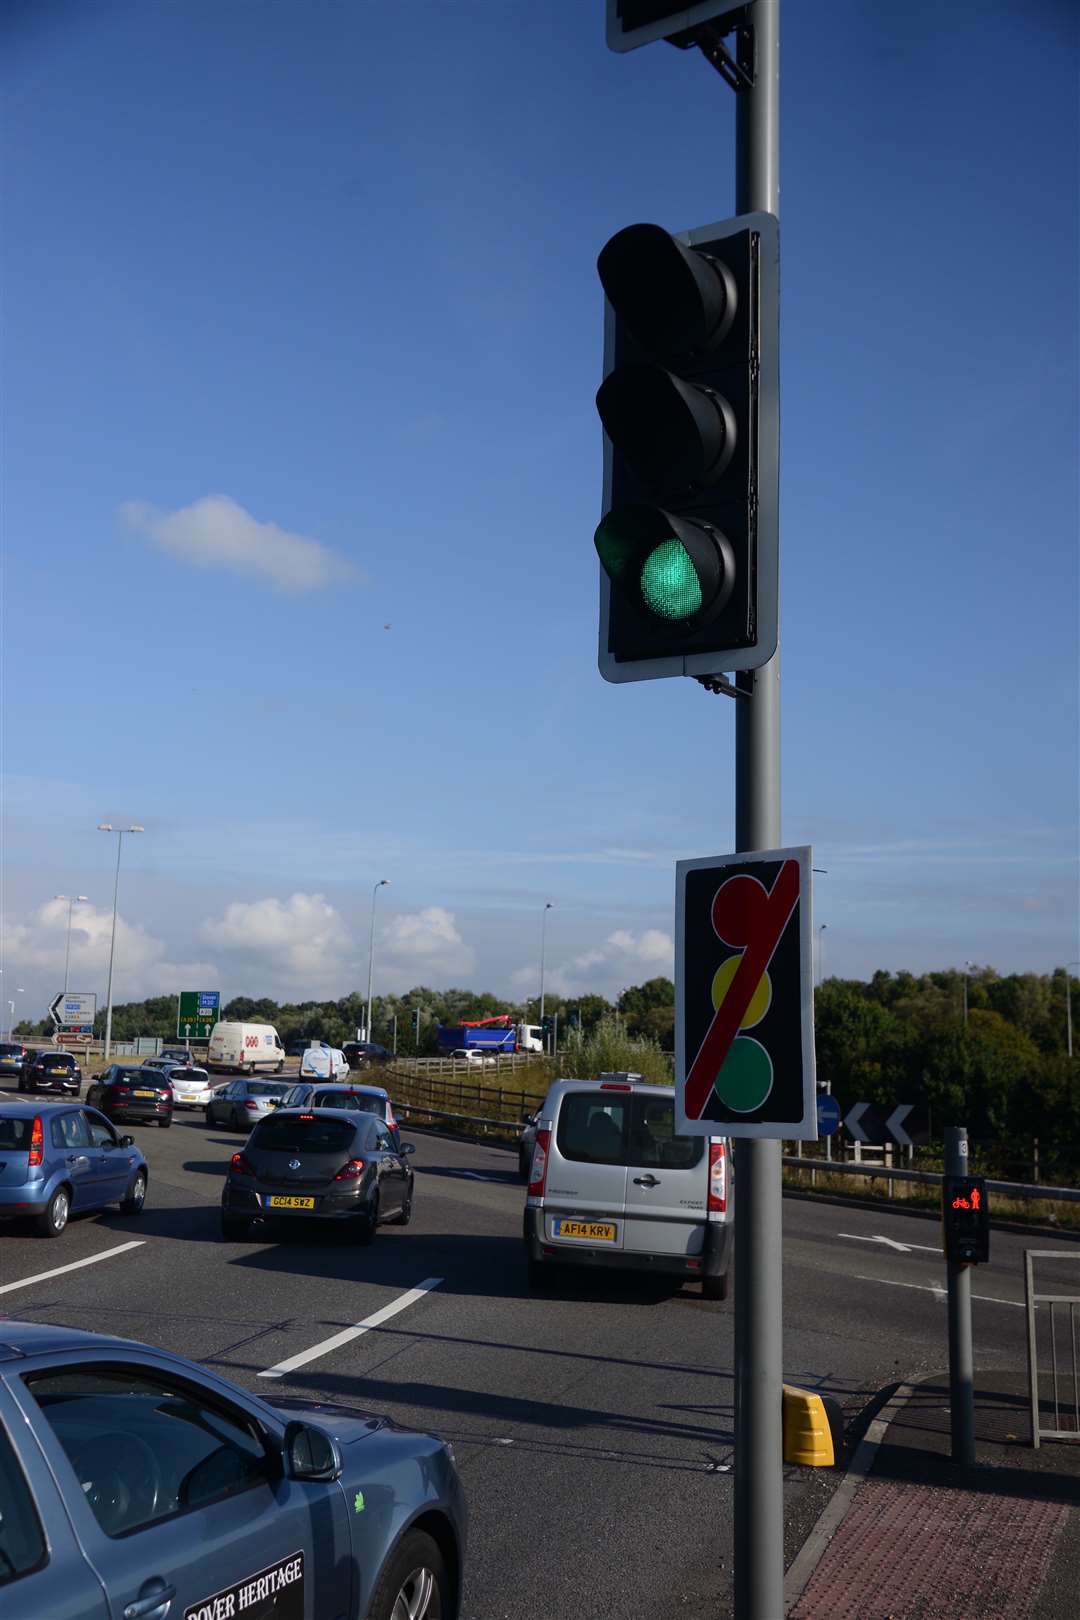 Junction 10 traffic lights are now operating properly again